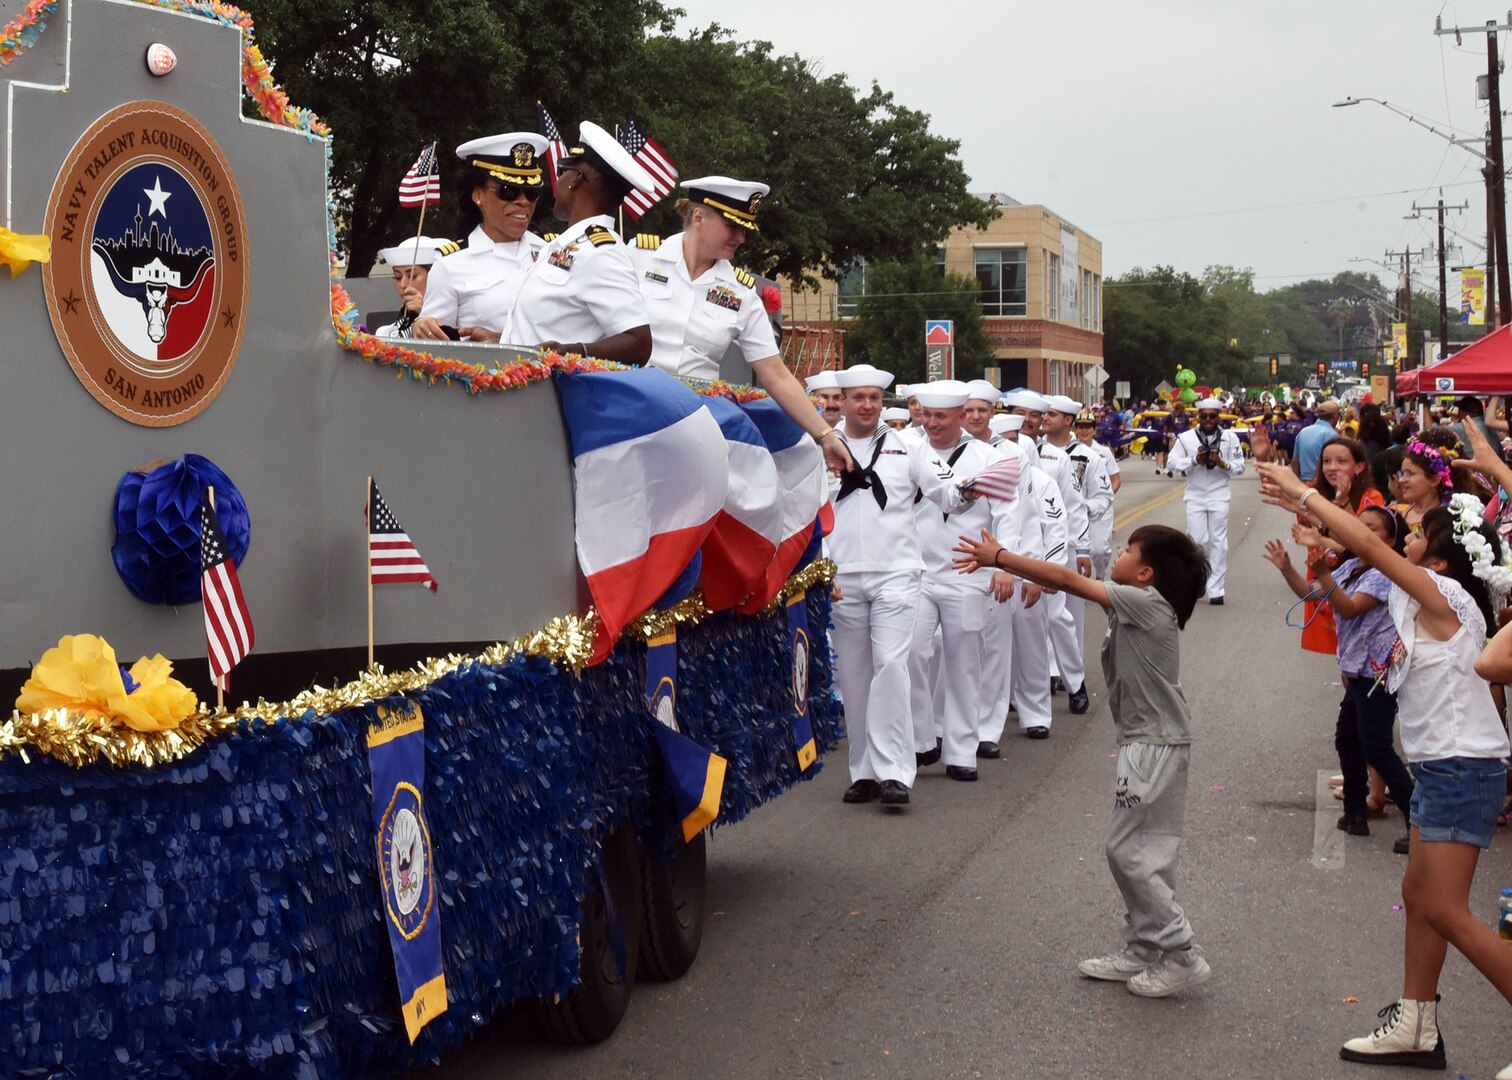 SAN ANTONIO - (April 26, 2024) – Capt. Jennifer Buechel (Nurse Corps), commanding officer, Naval Medical Research Unit (NAMRU) San Antonio, gives a child a Navy Fiesta Medal during the Battle of Flowers Parade held during Fiesta San Antonio. The Battle of Flowers Parade is the oldest event and largest parade of Fiesta San Antonio attracting crowds of more than 350,000. Leading more than 100 Sailors in the parade was Rear Adm. Walter Brafford, commander, Naval Medical Forces Support Command (NMFSC). Joint Base San Antonio is proud to be part of the diverse and vibrant community of San Antonio also known as Military City USA. (U.S. Navy Photo by Burrell Parmer, Naval Medical Research Unit San Antonio Public Affairs/Released)